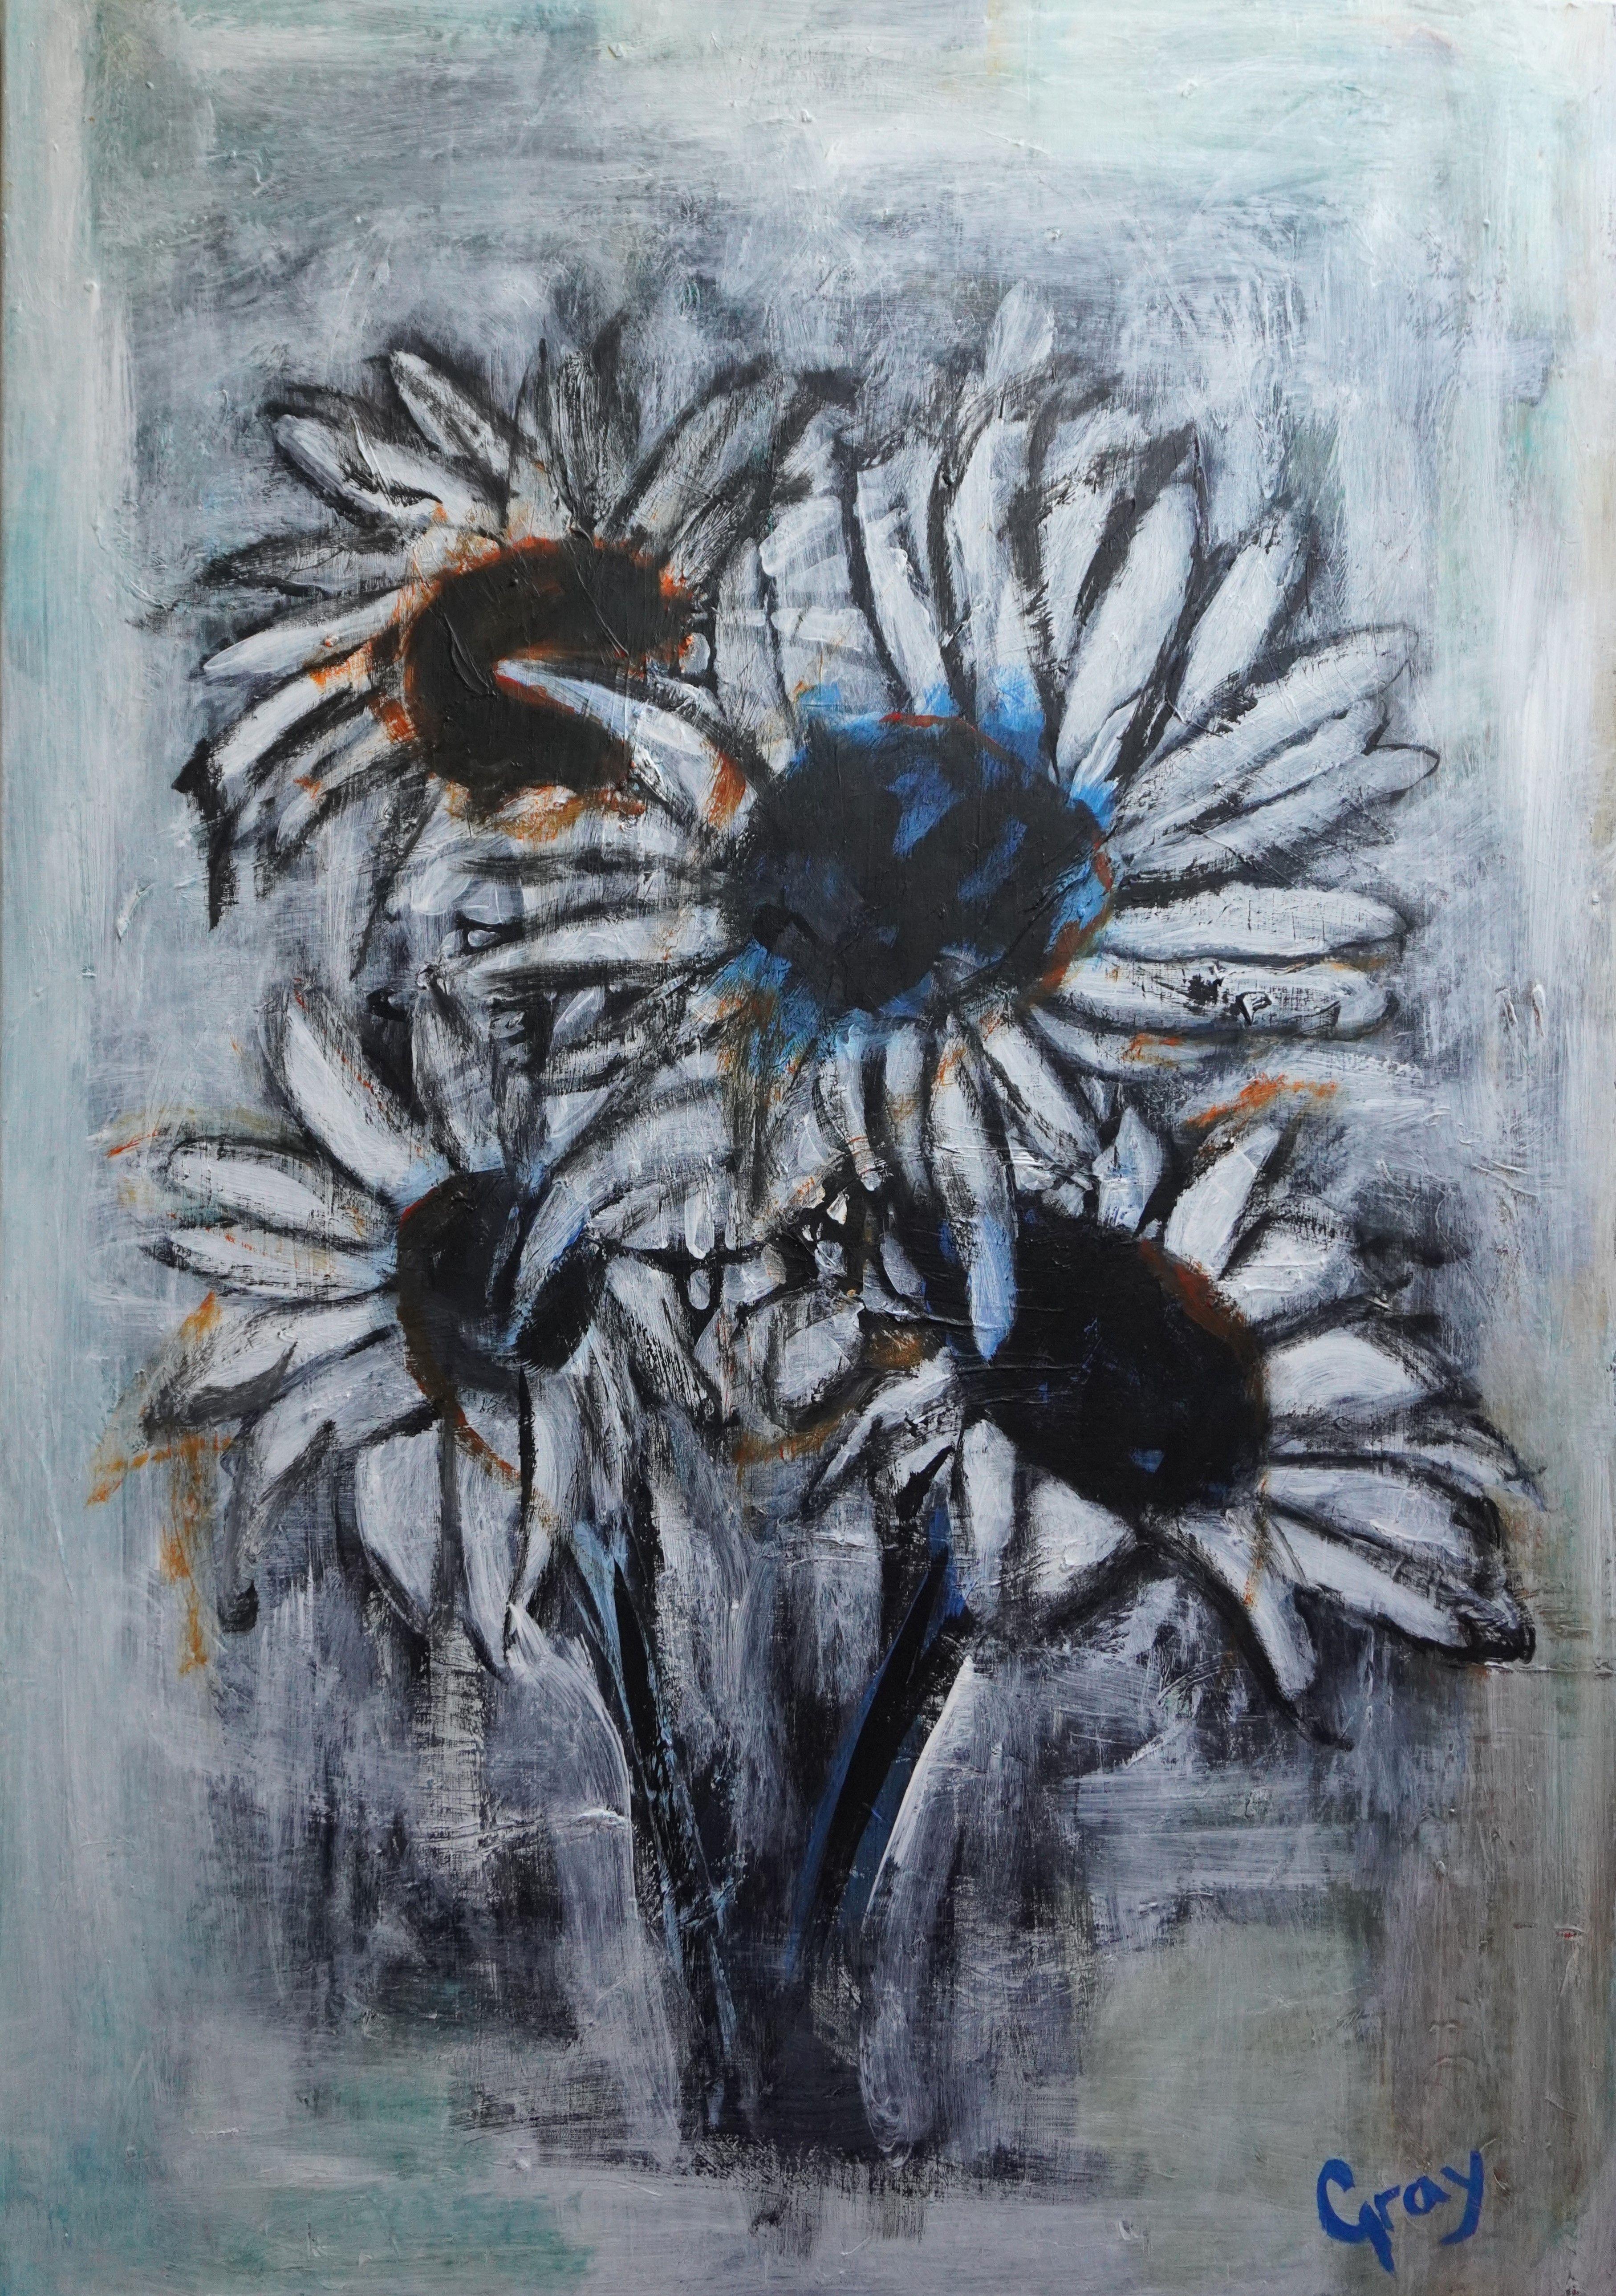 Wildflowers dancing in abstract form. In this series, Gray subtly underlines the movement of wildflowers rather than opting to paint them as still life as most often is the case. There is a certain bold and wild beauty to his latest series that is